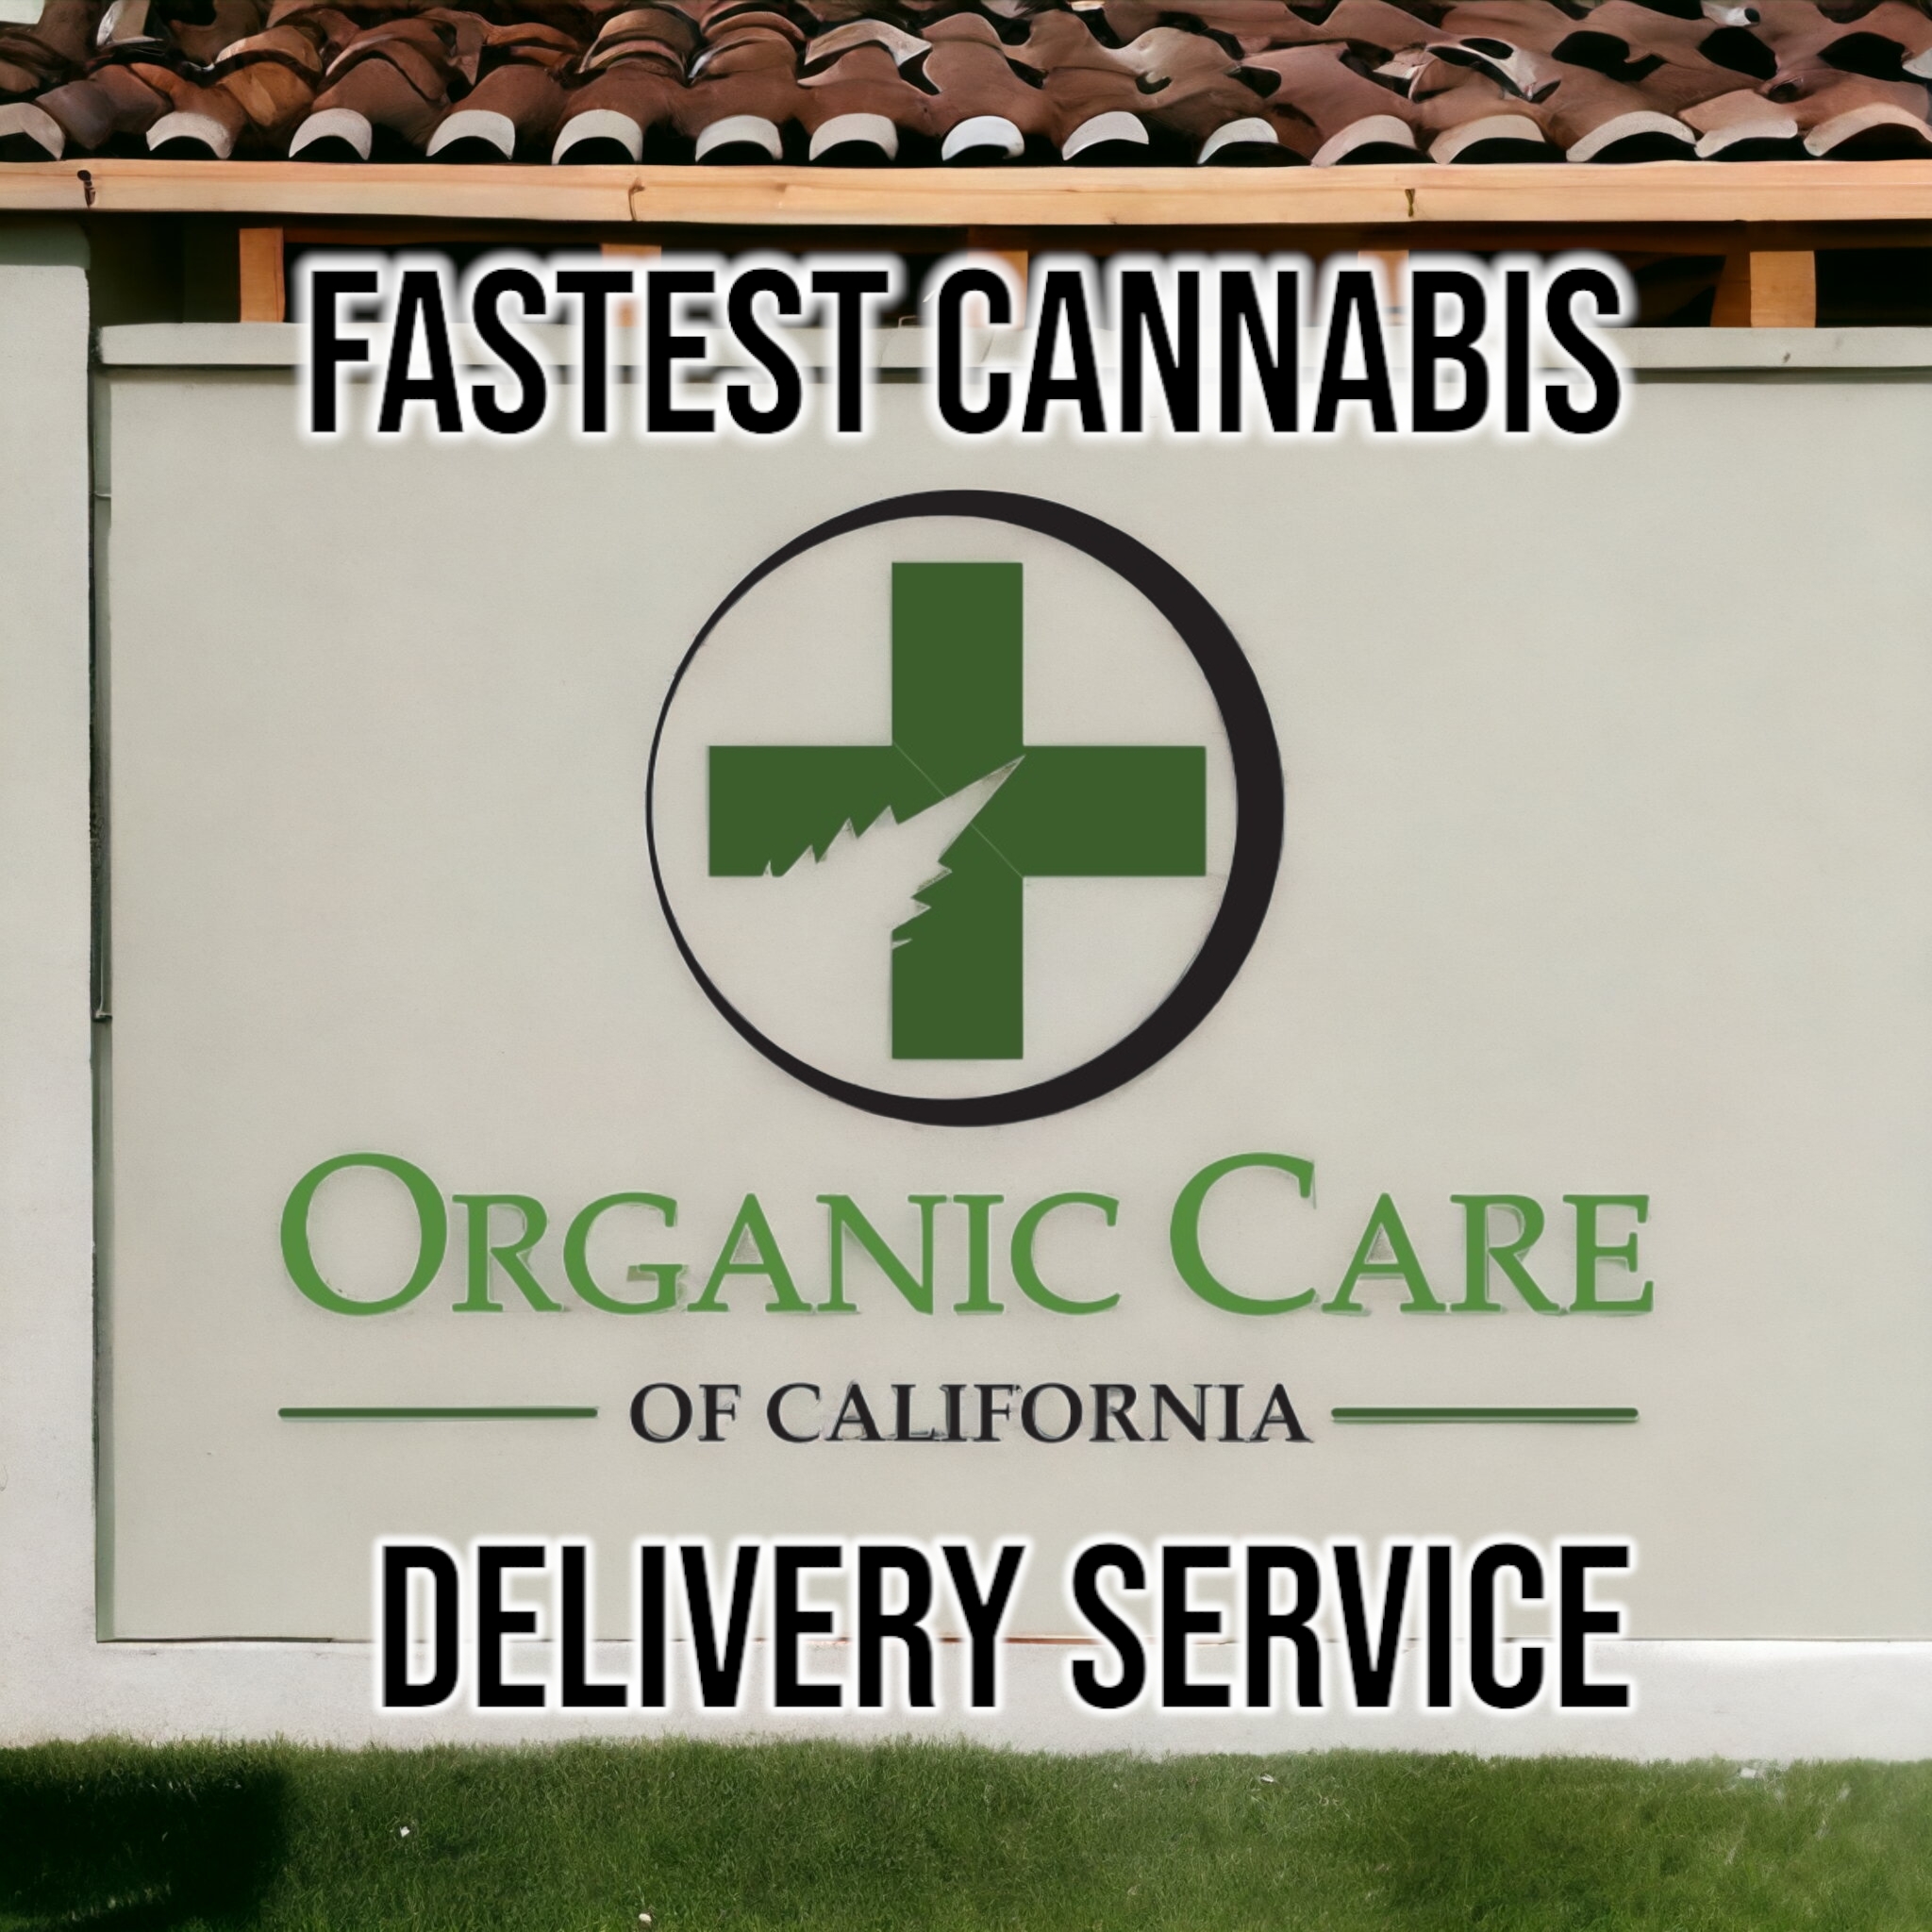 Organic Care of California: Legal Recreational Cannabis Delivery